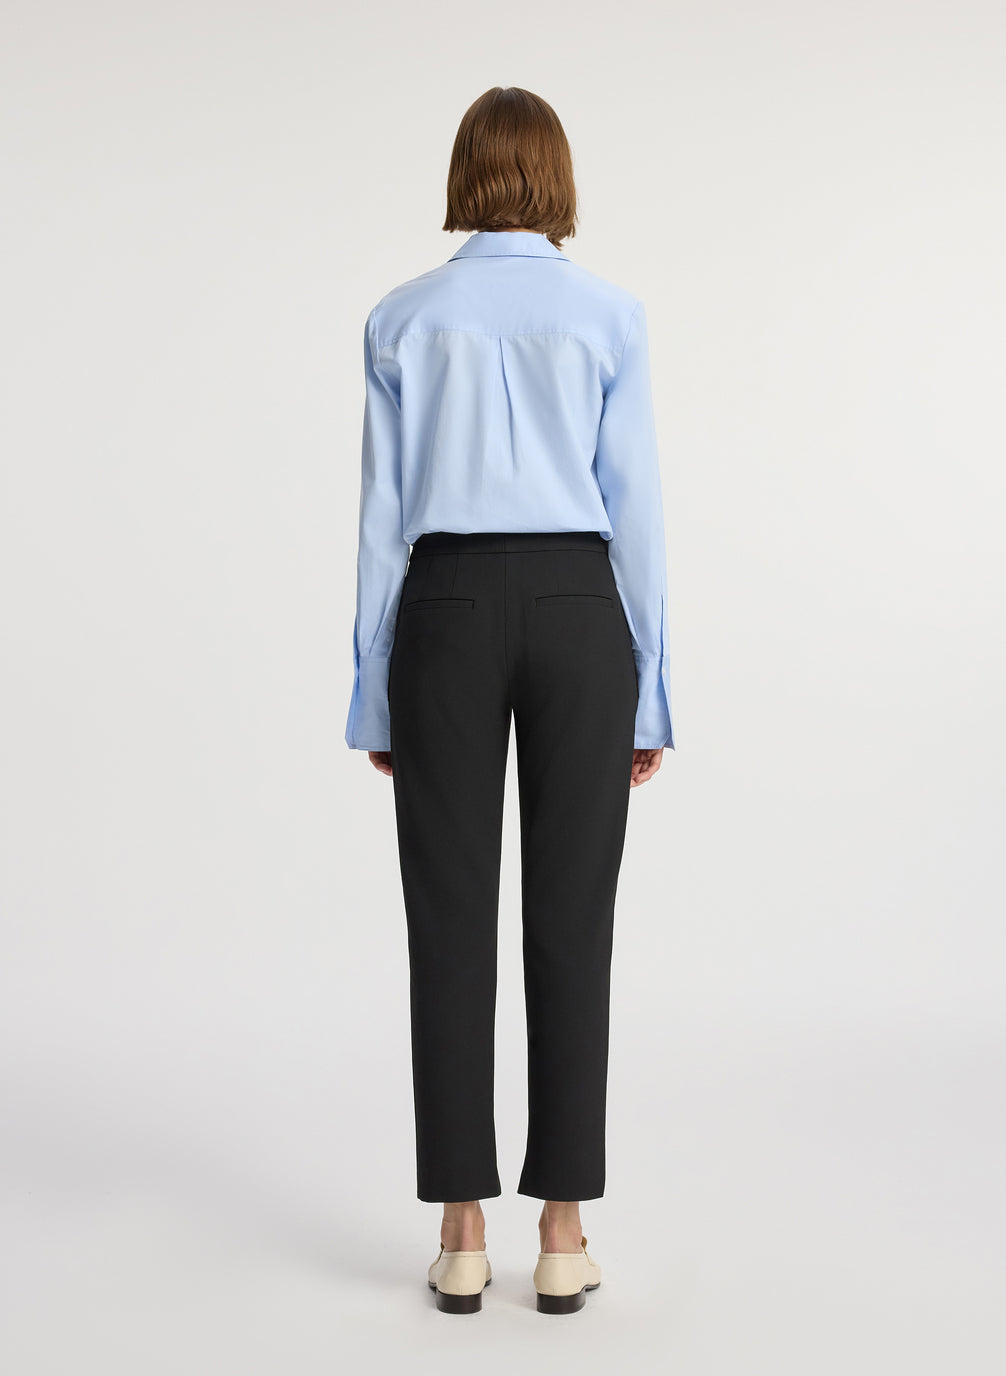 back view of woman wearing light blue button down collared shirt and black ankle length pants